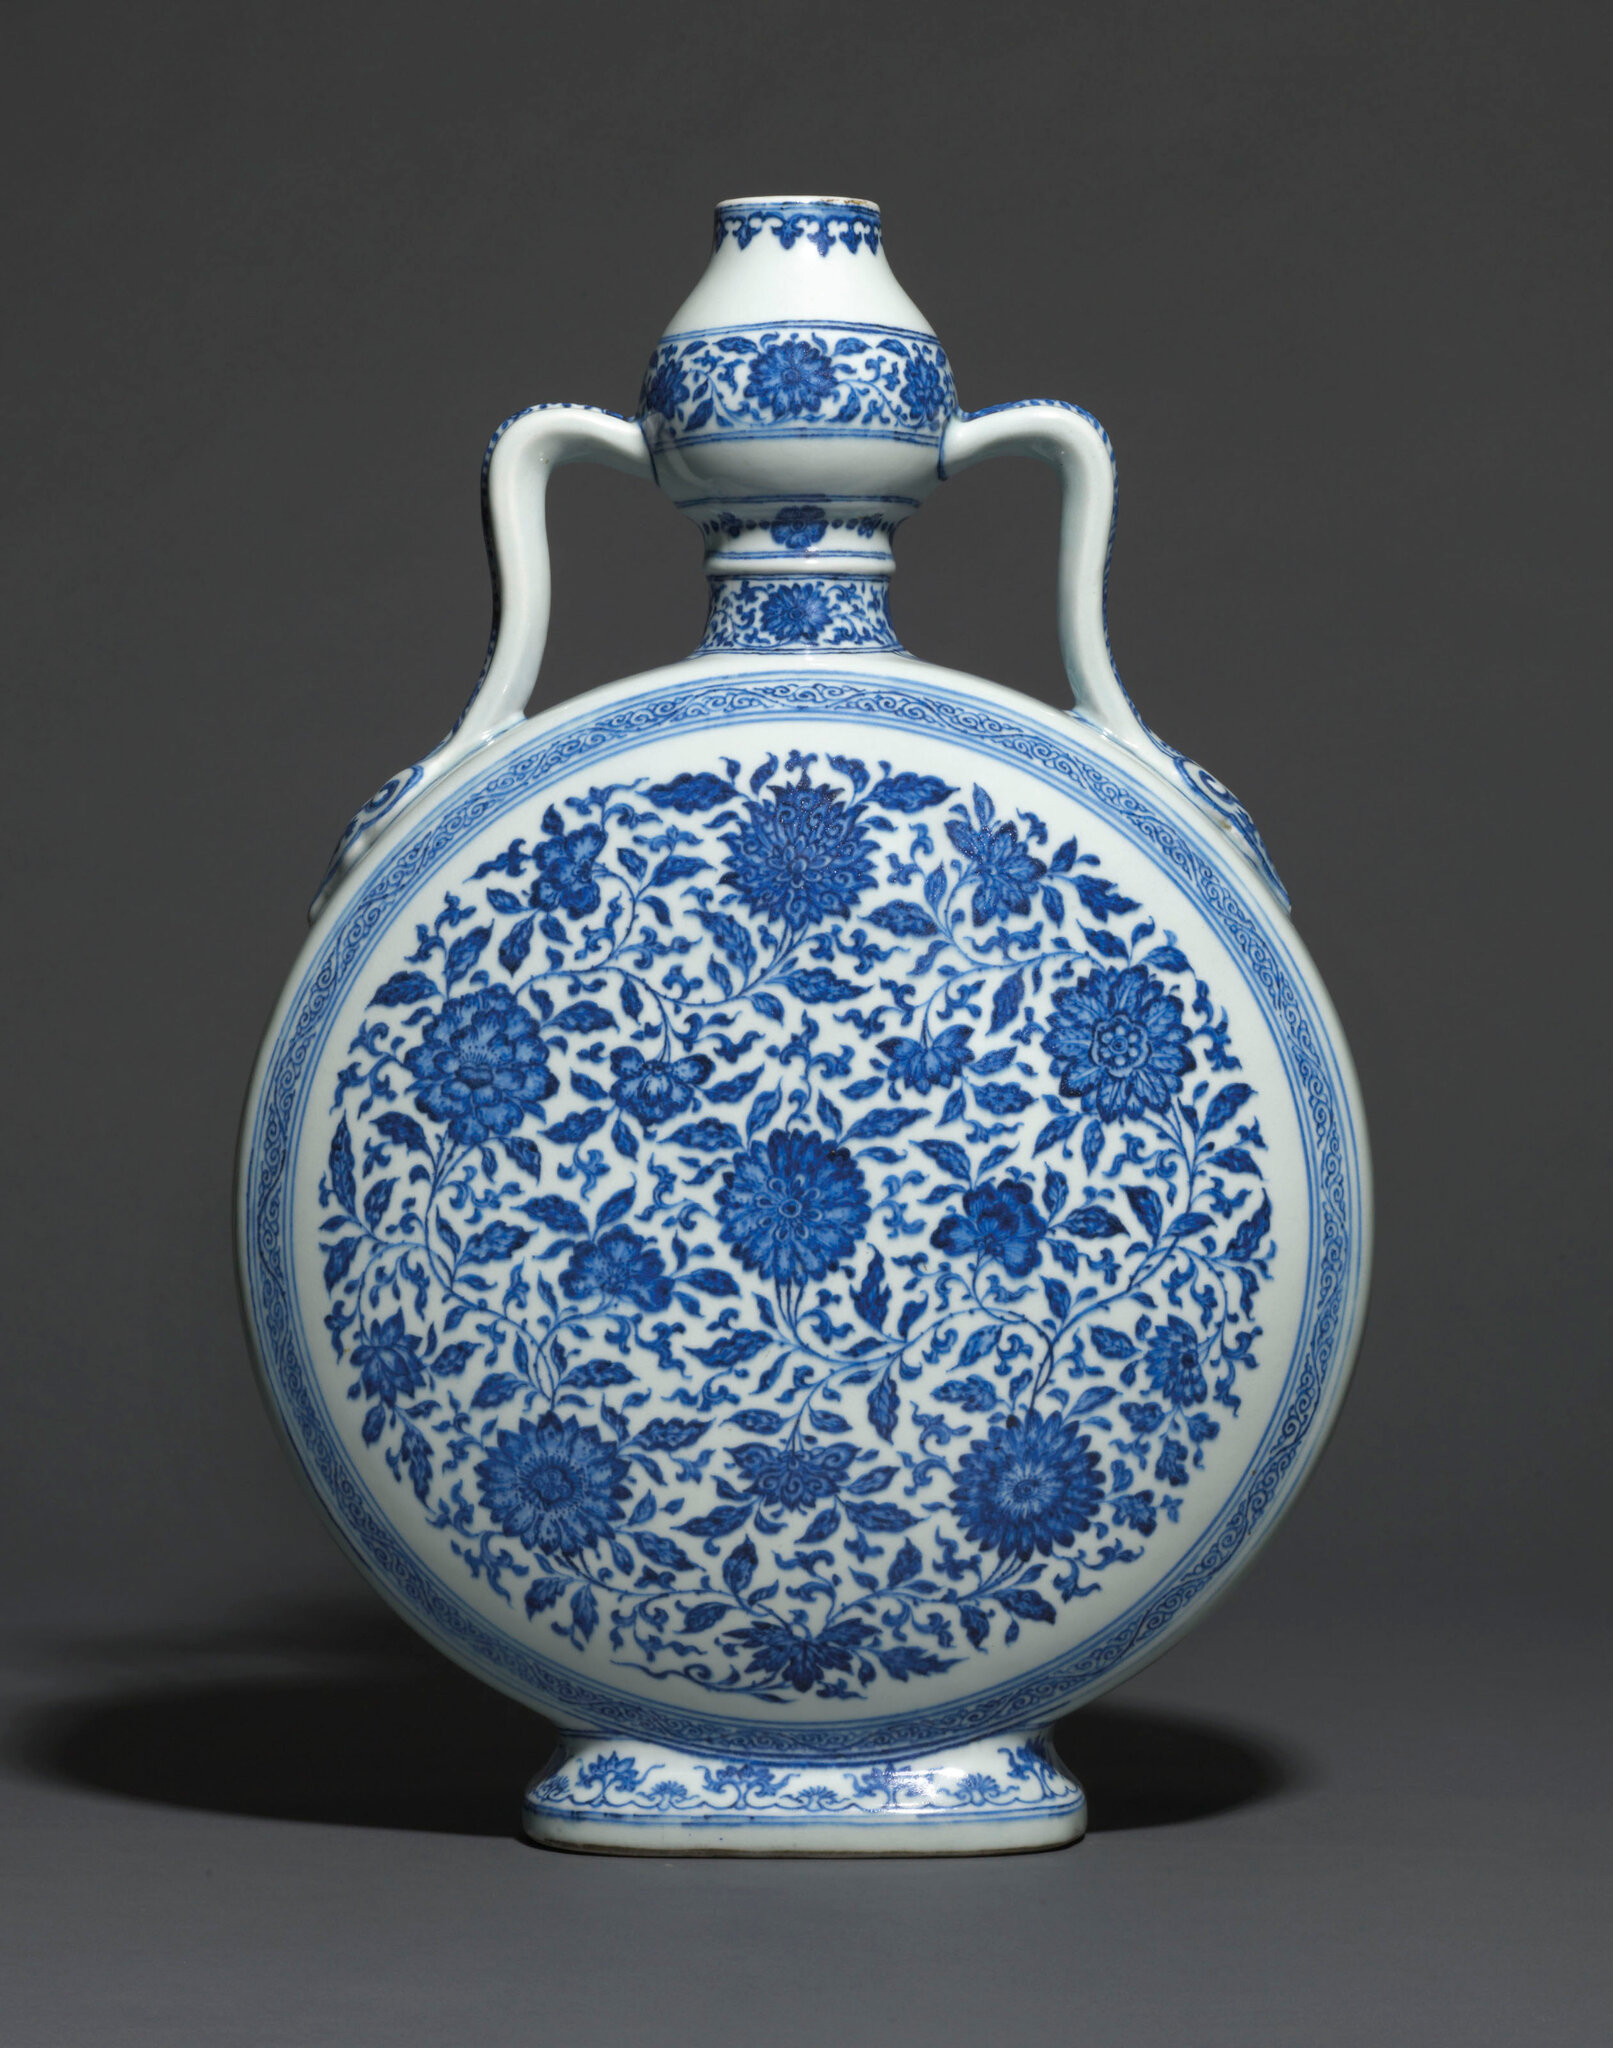 Christie's announces highlights from the Fine Chinese Ceramics 